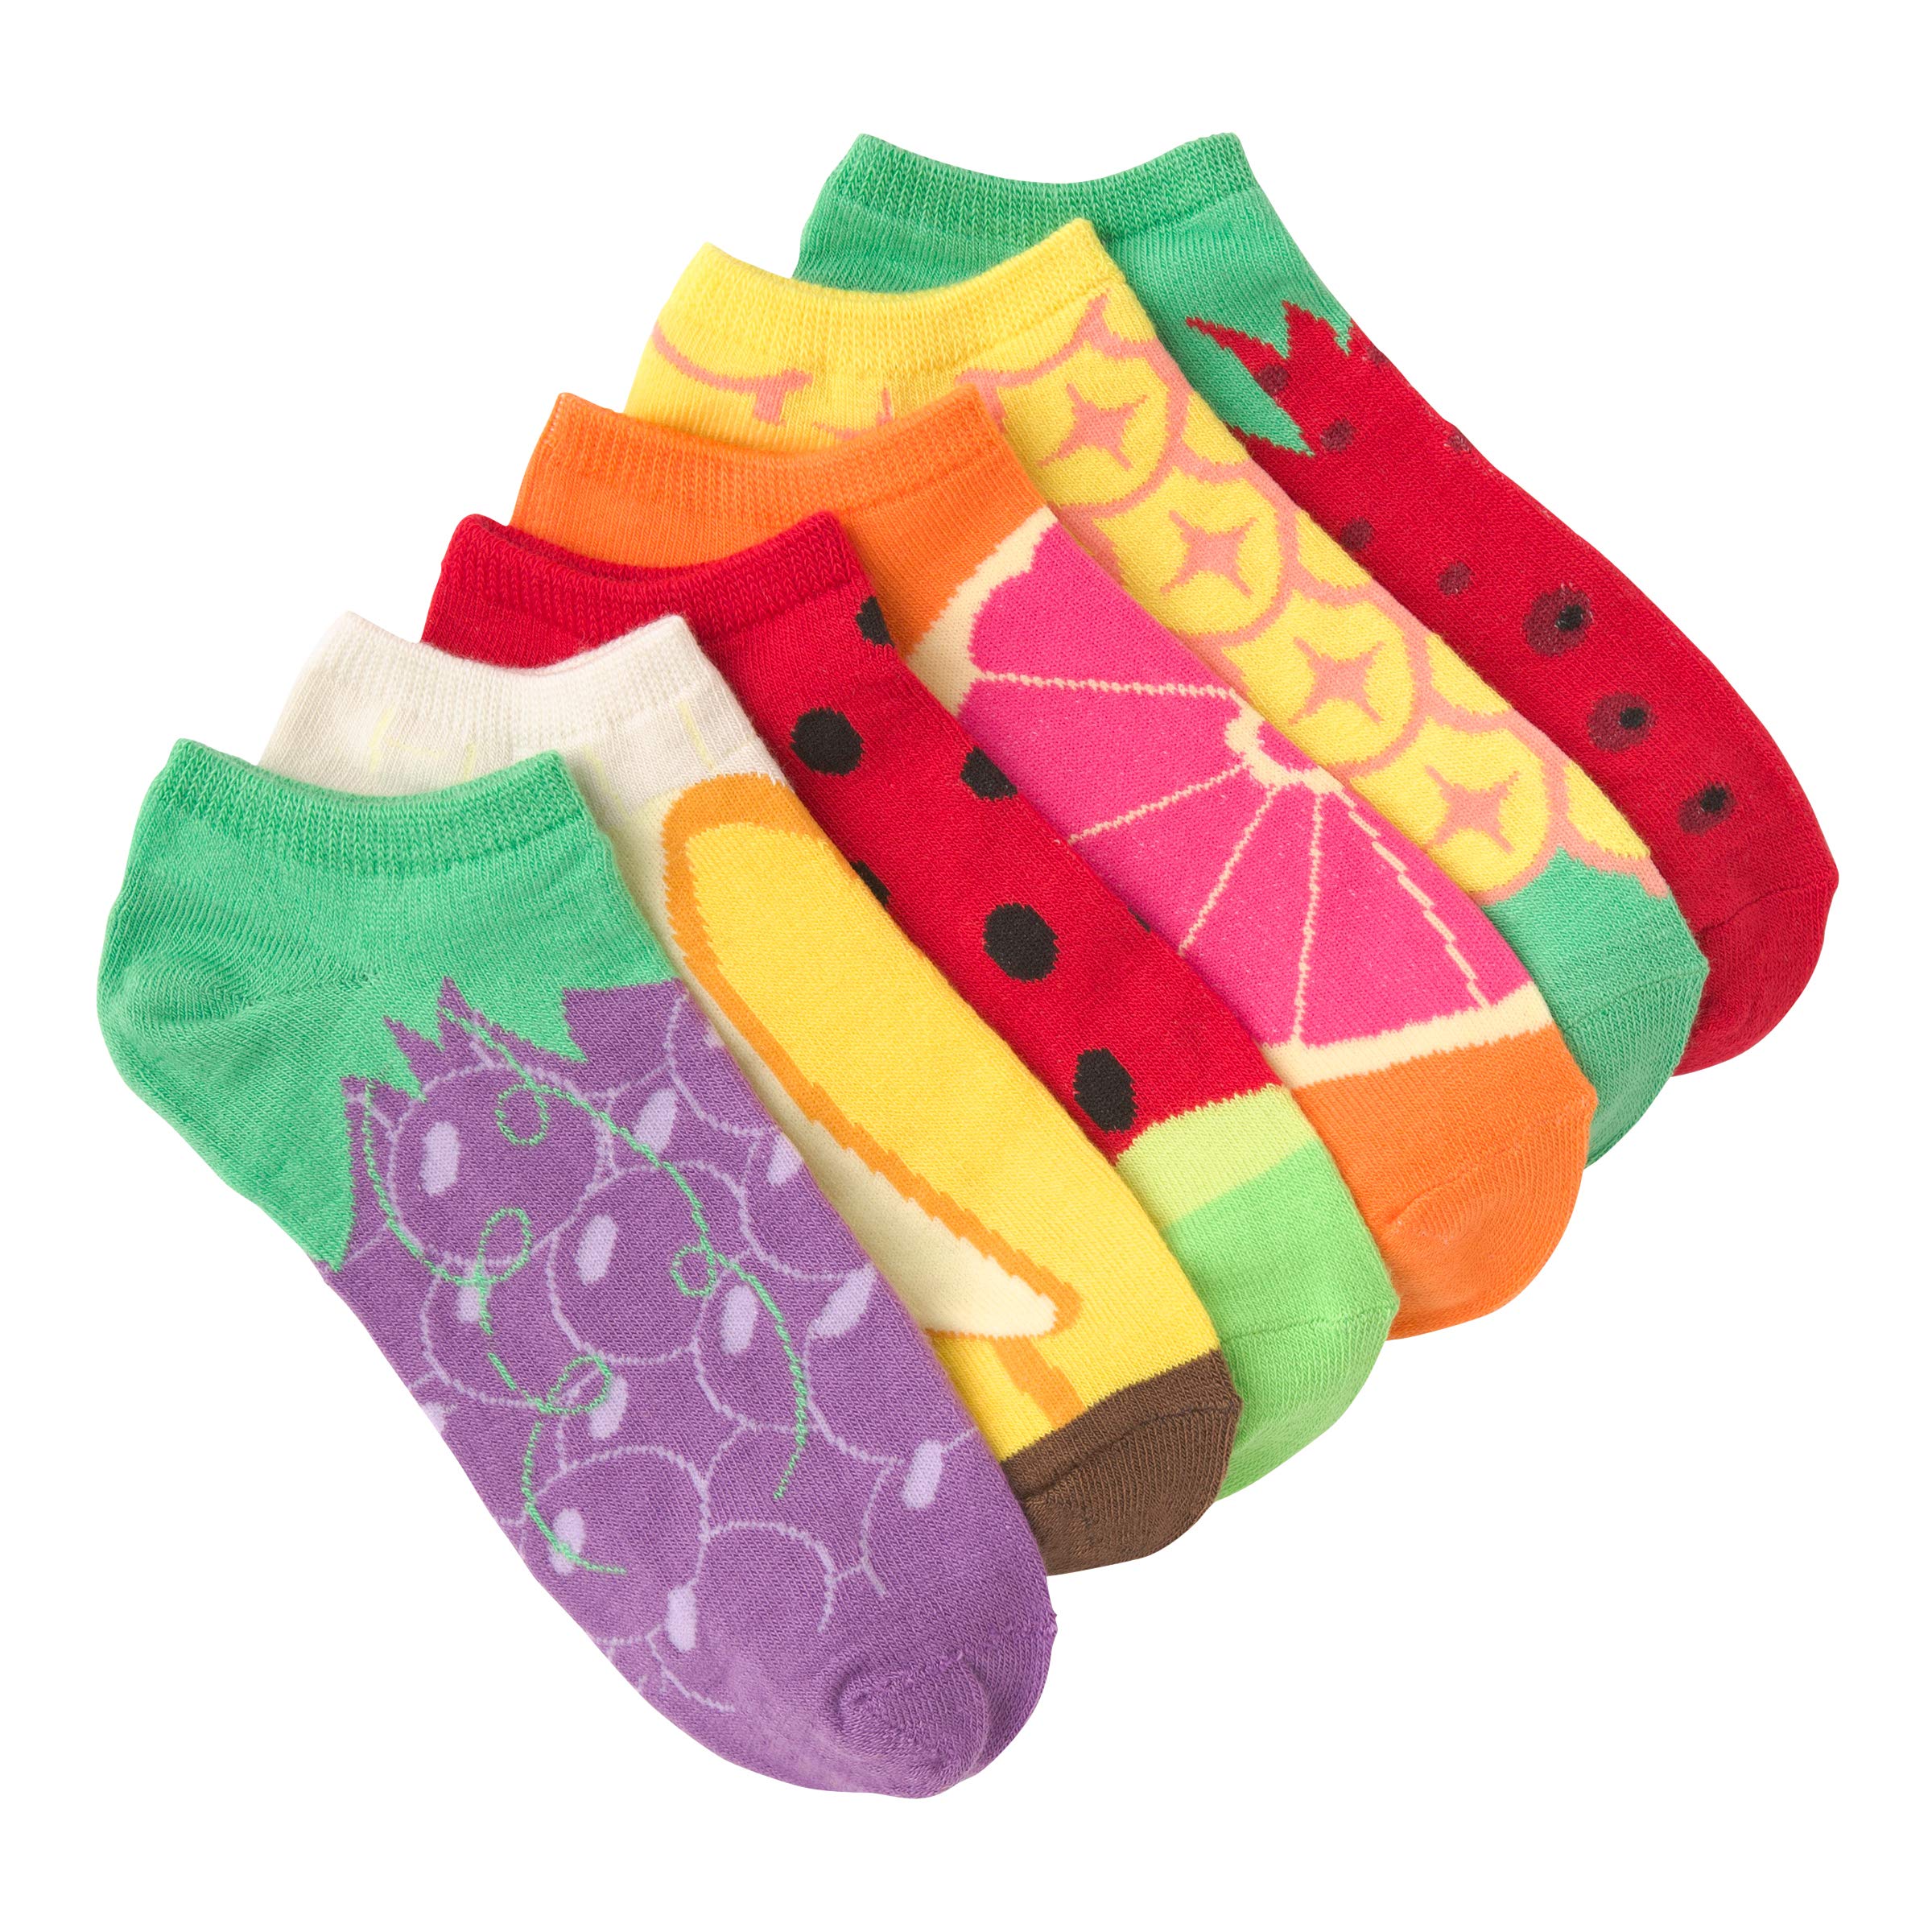 K. Bell Socks womens 6 Pair Pack Fun Food and Beverage Novelty Low Cut No Show Socks